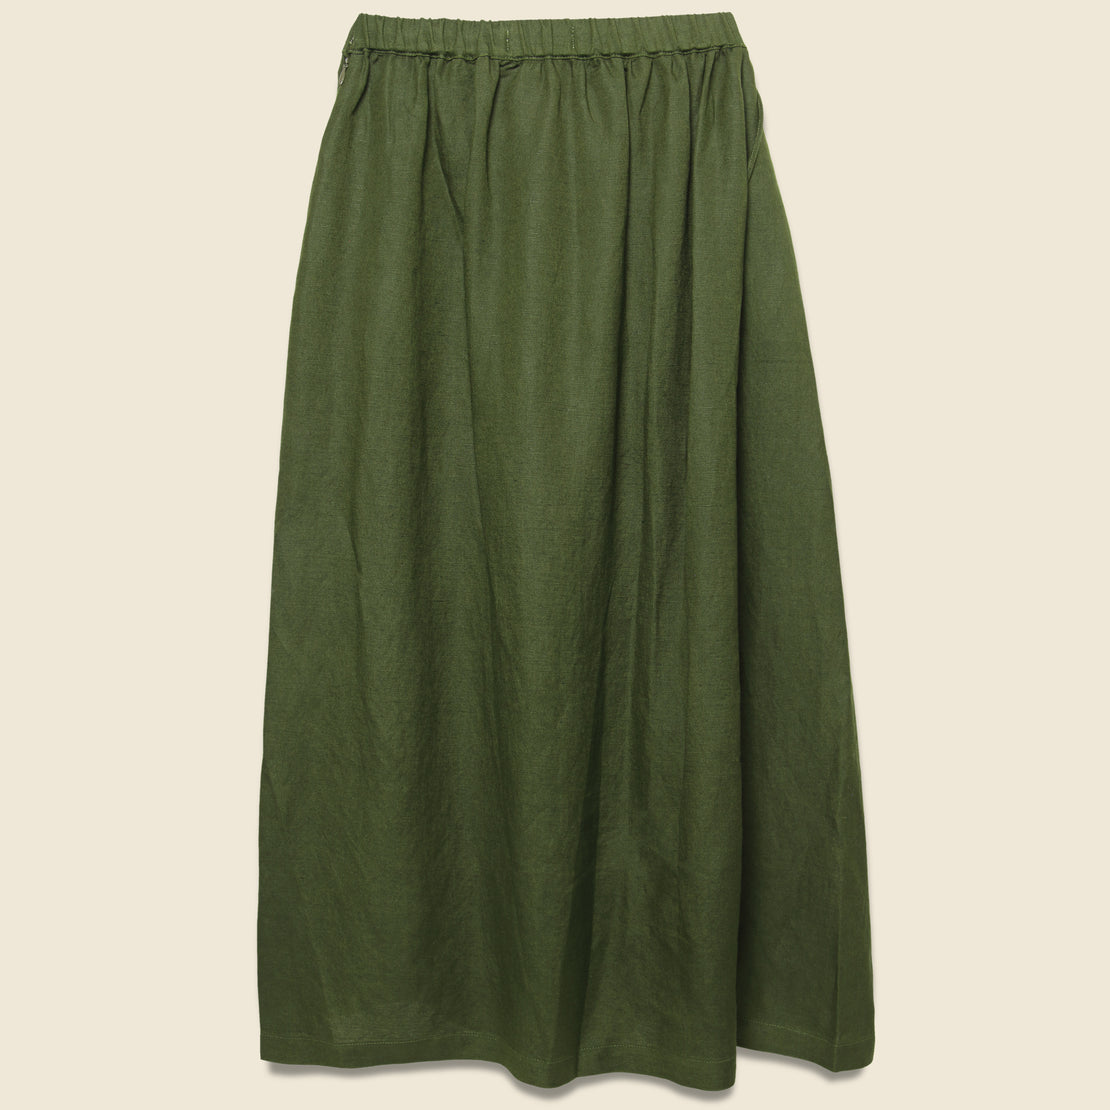 Pleated Skirt - Moss - First Rite - STAG Provisions - W - Onepiece - Skirt